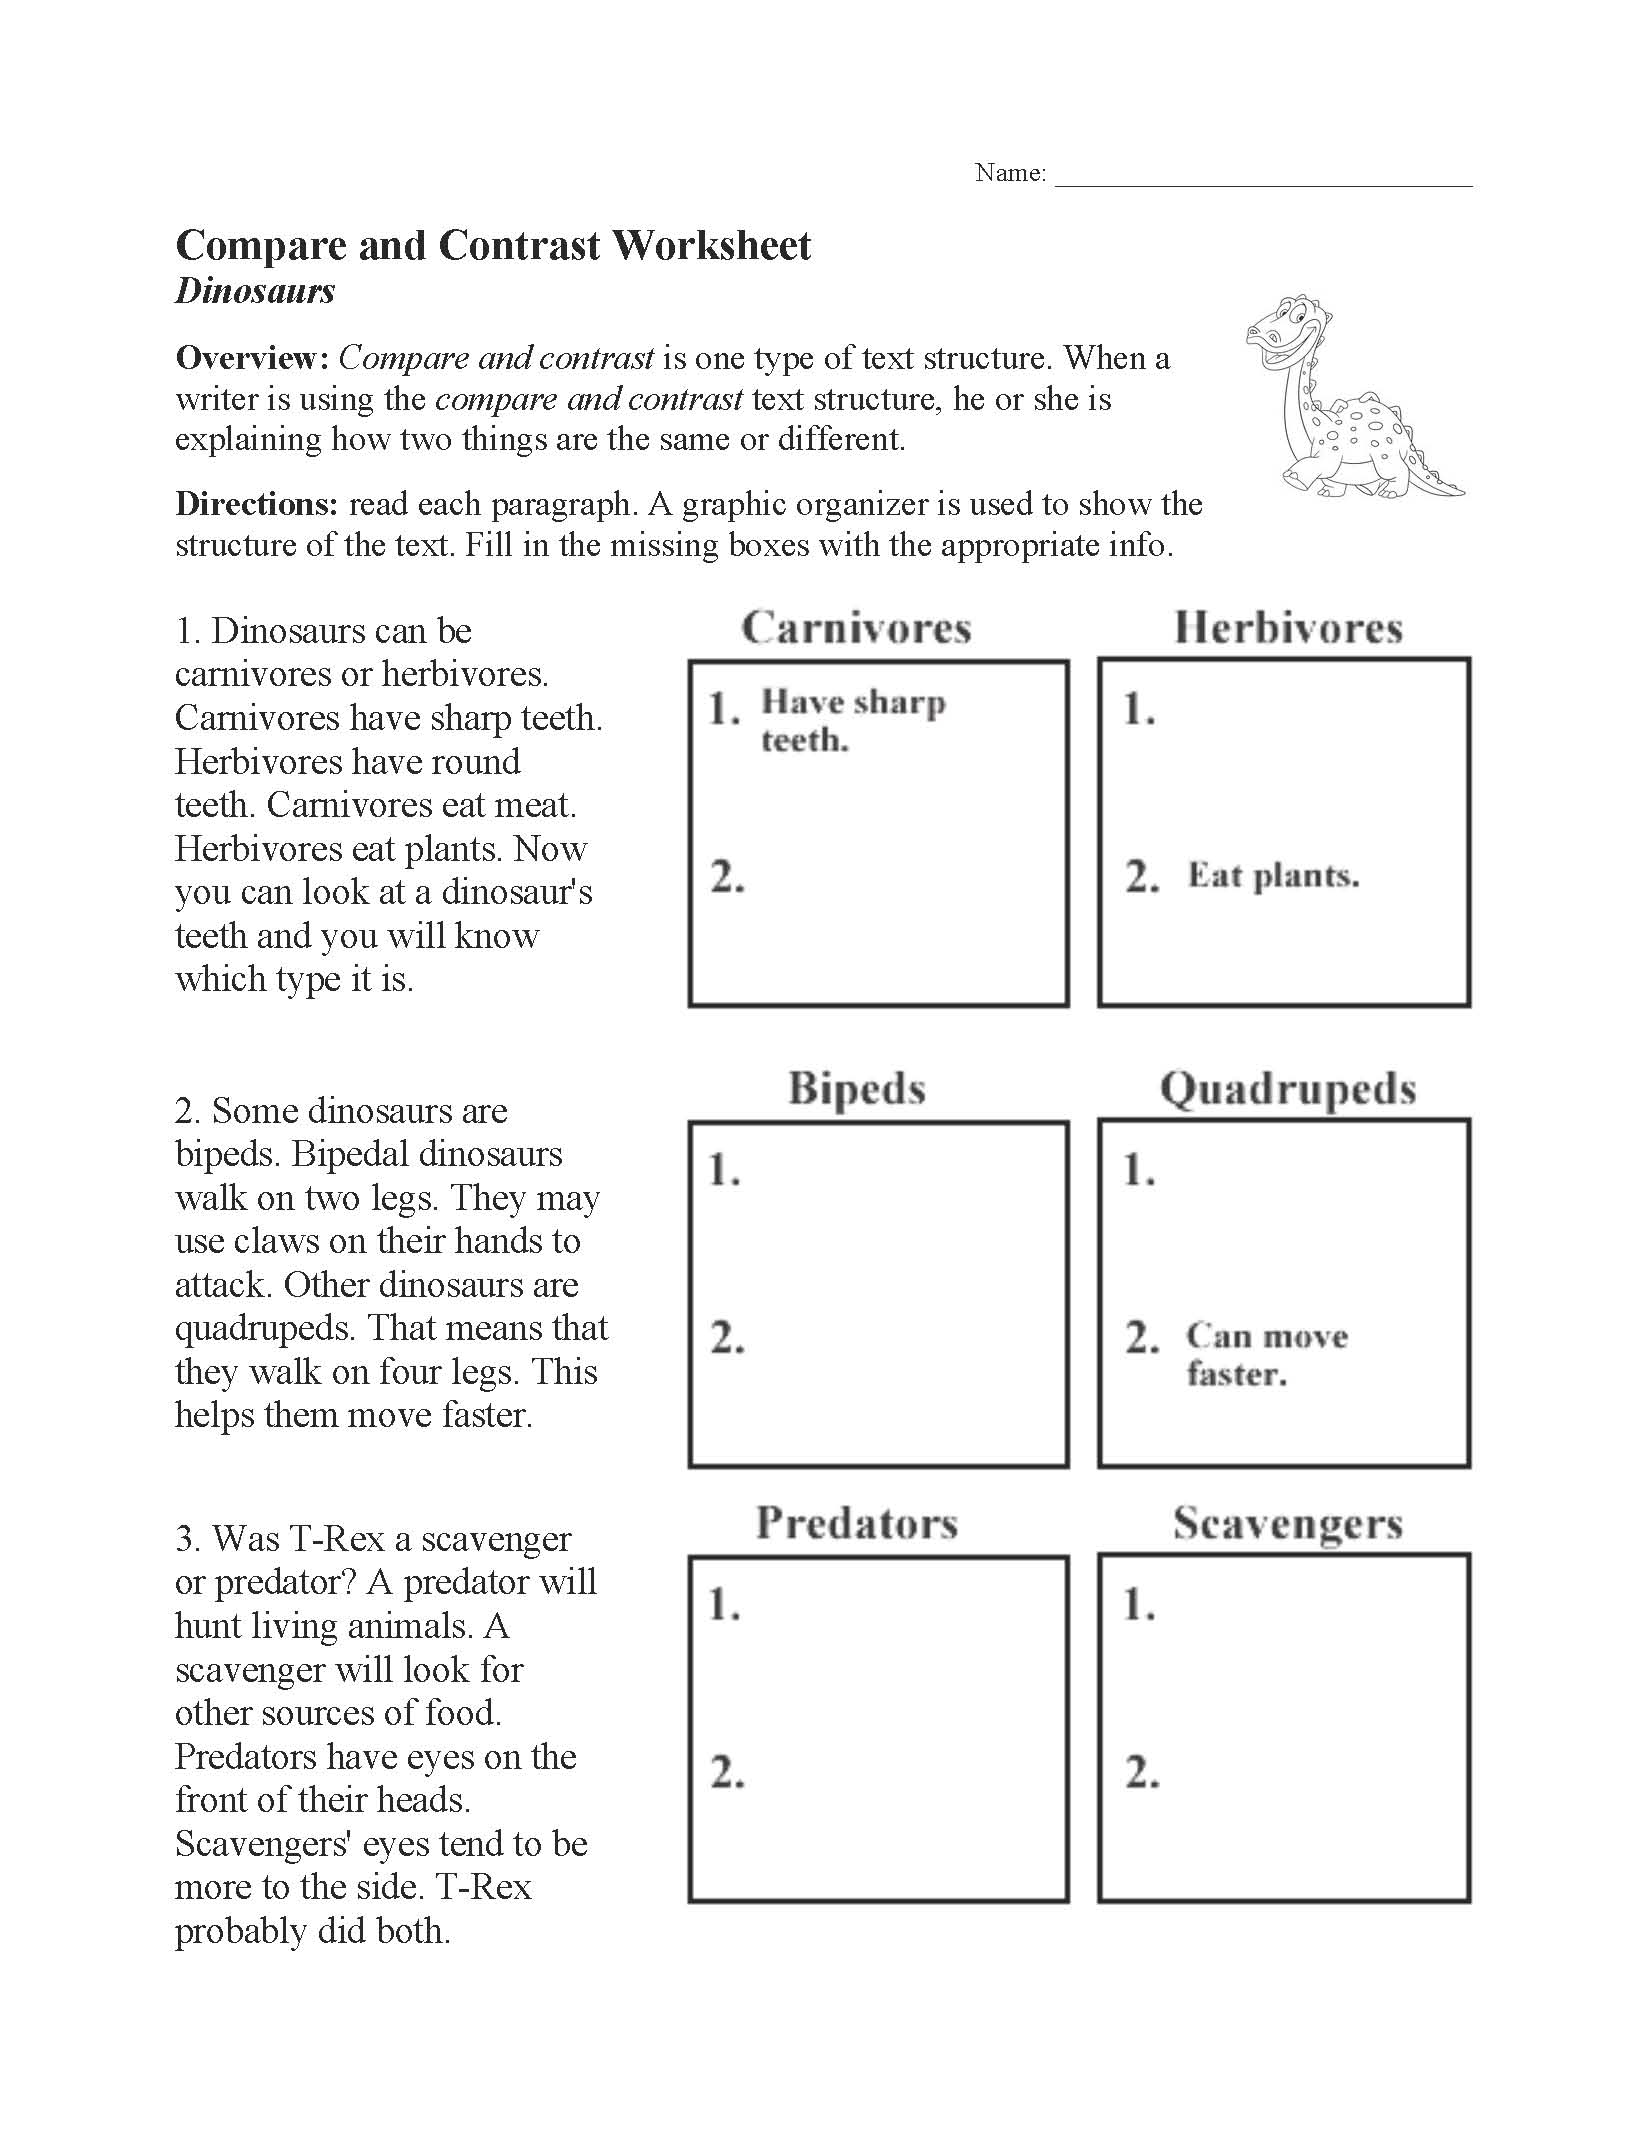 Text Structure Worksheets  Free for Primary Grades Intended For Text Structure Worksheet 4th Grade